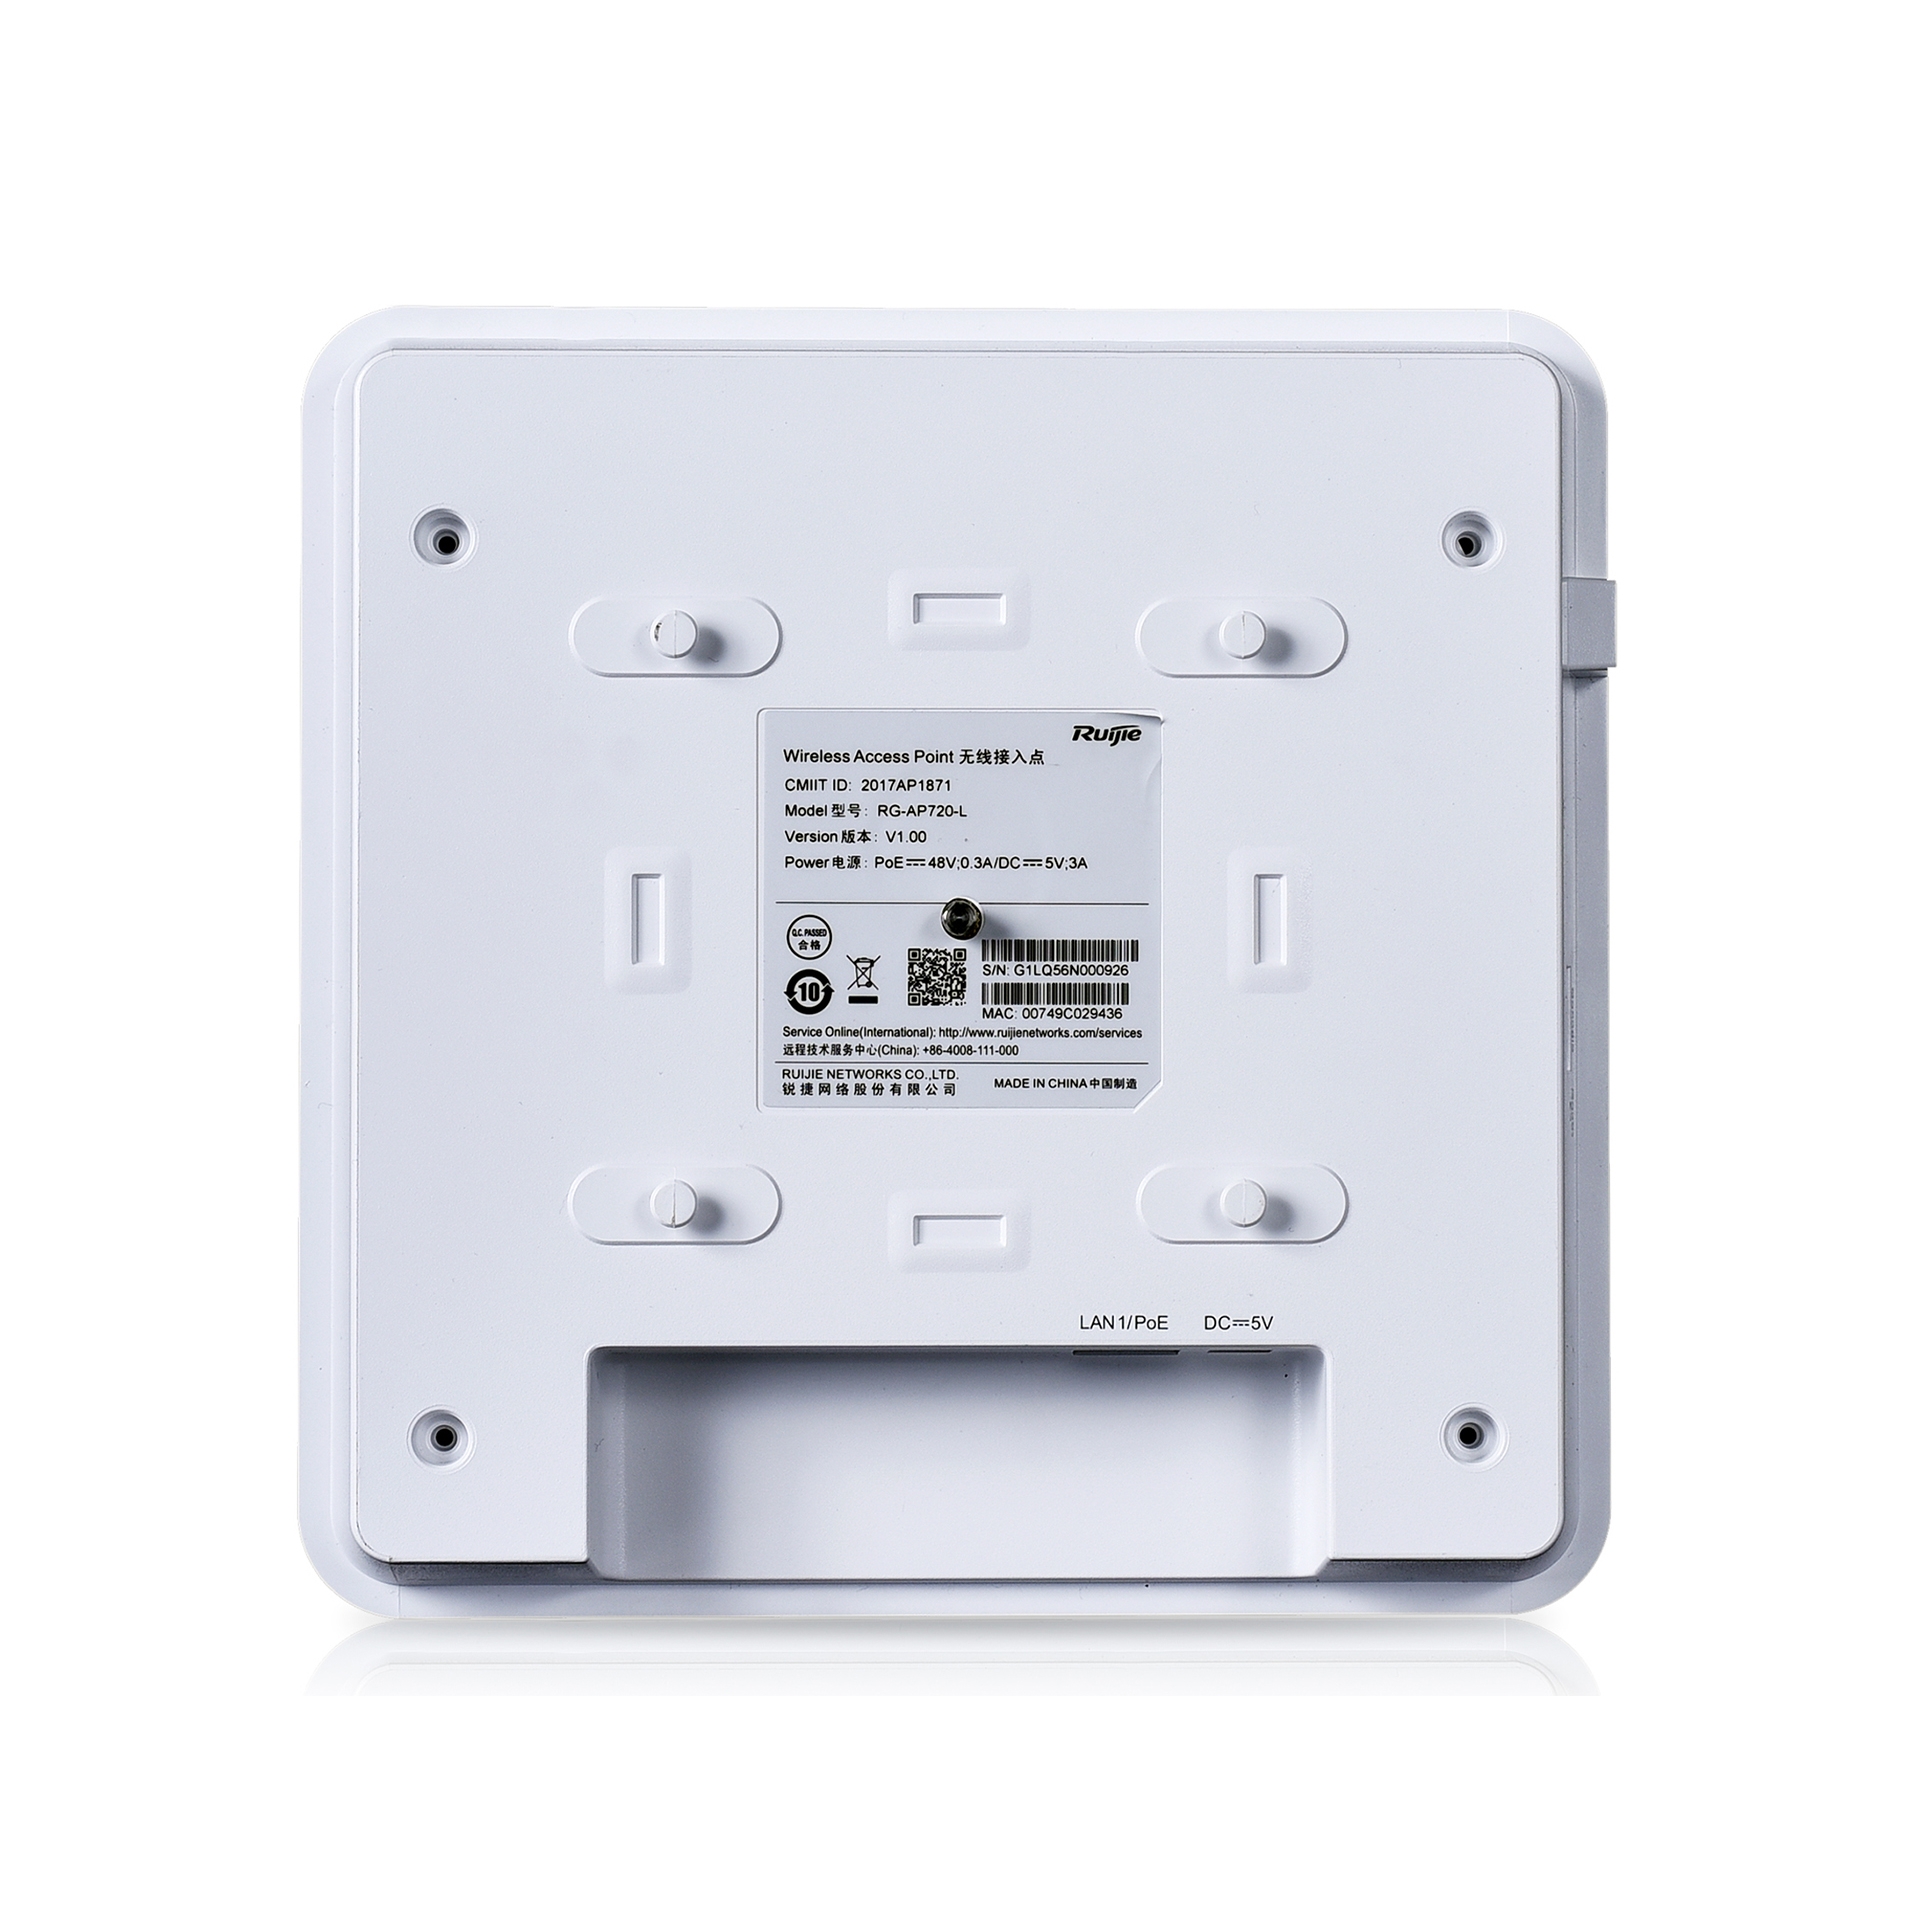 RUIJIE RG-AP720-L 1167MBPS 2PORT 2x2MIMO 2.4 GHZ & 5 GHZ INDOOR WAVE2 ACCESS POINT